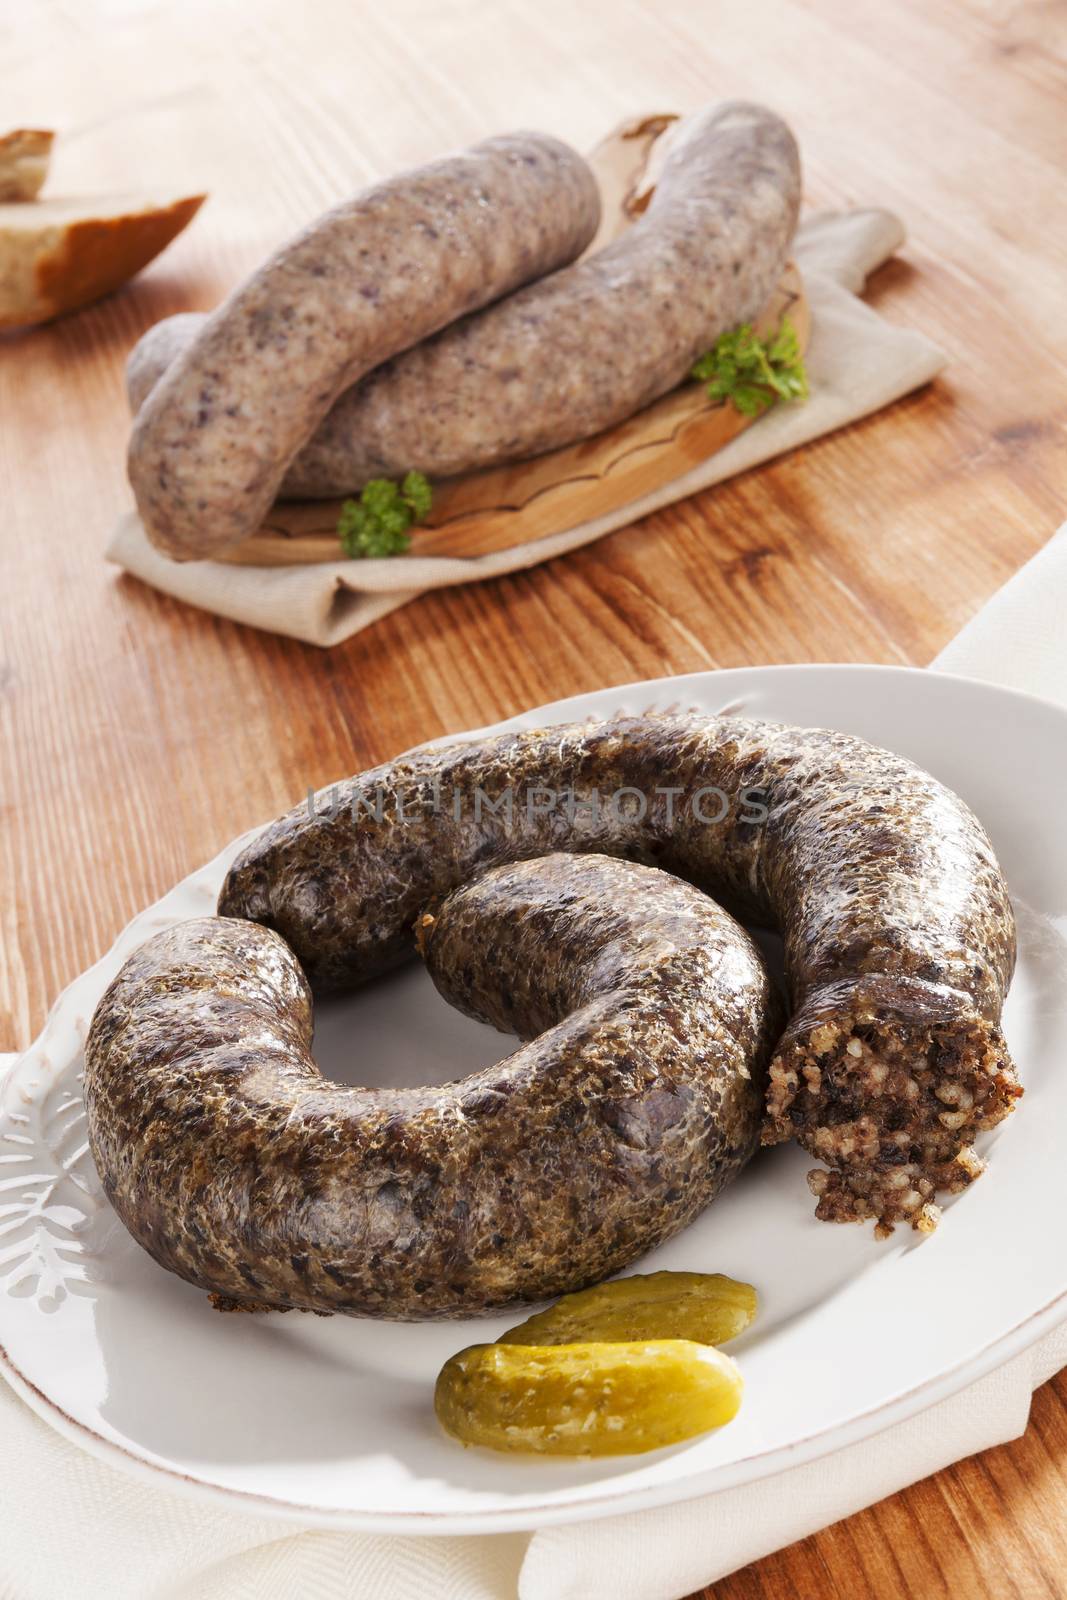 Blood sausage and rice sausage on wooden background. Culinary traditional european eating, rustic style.